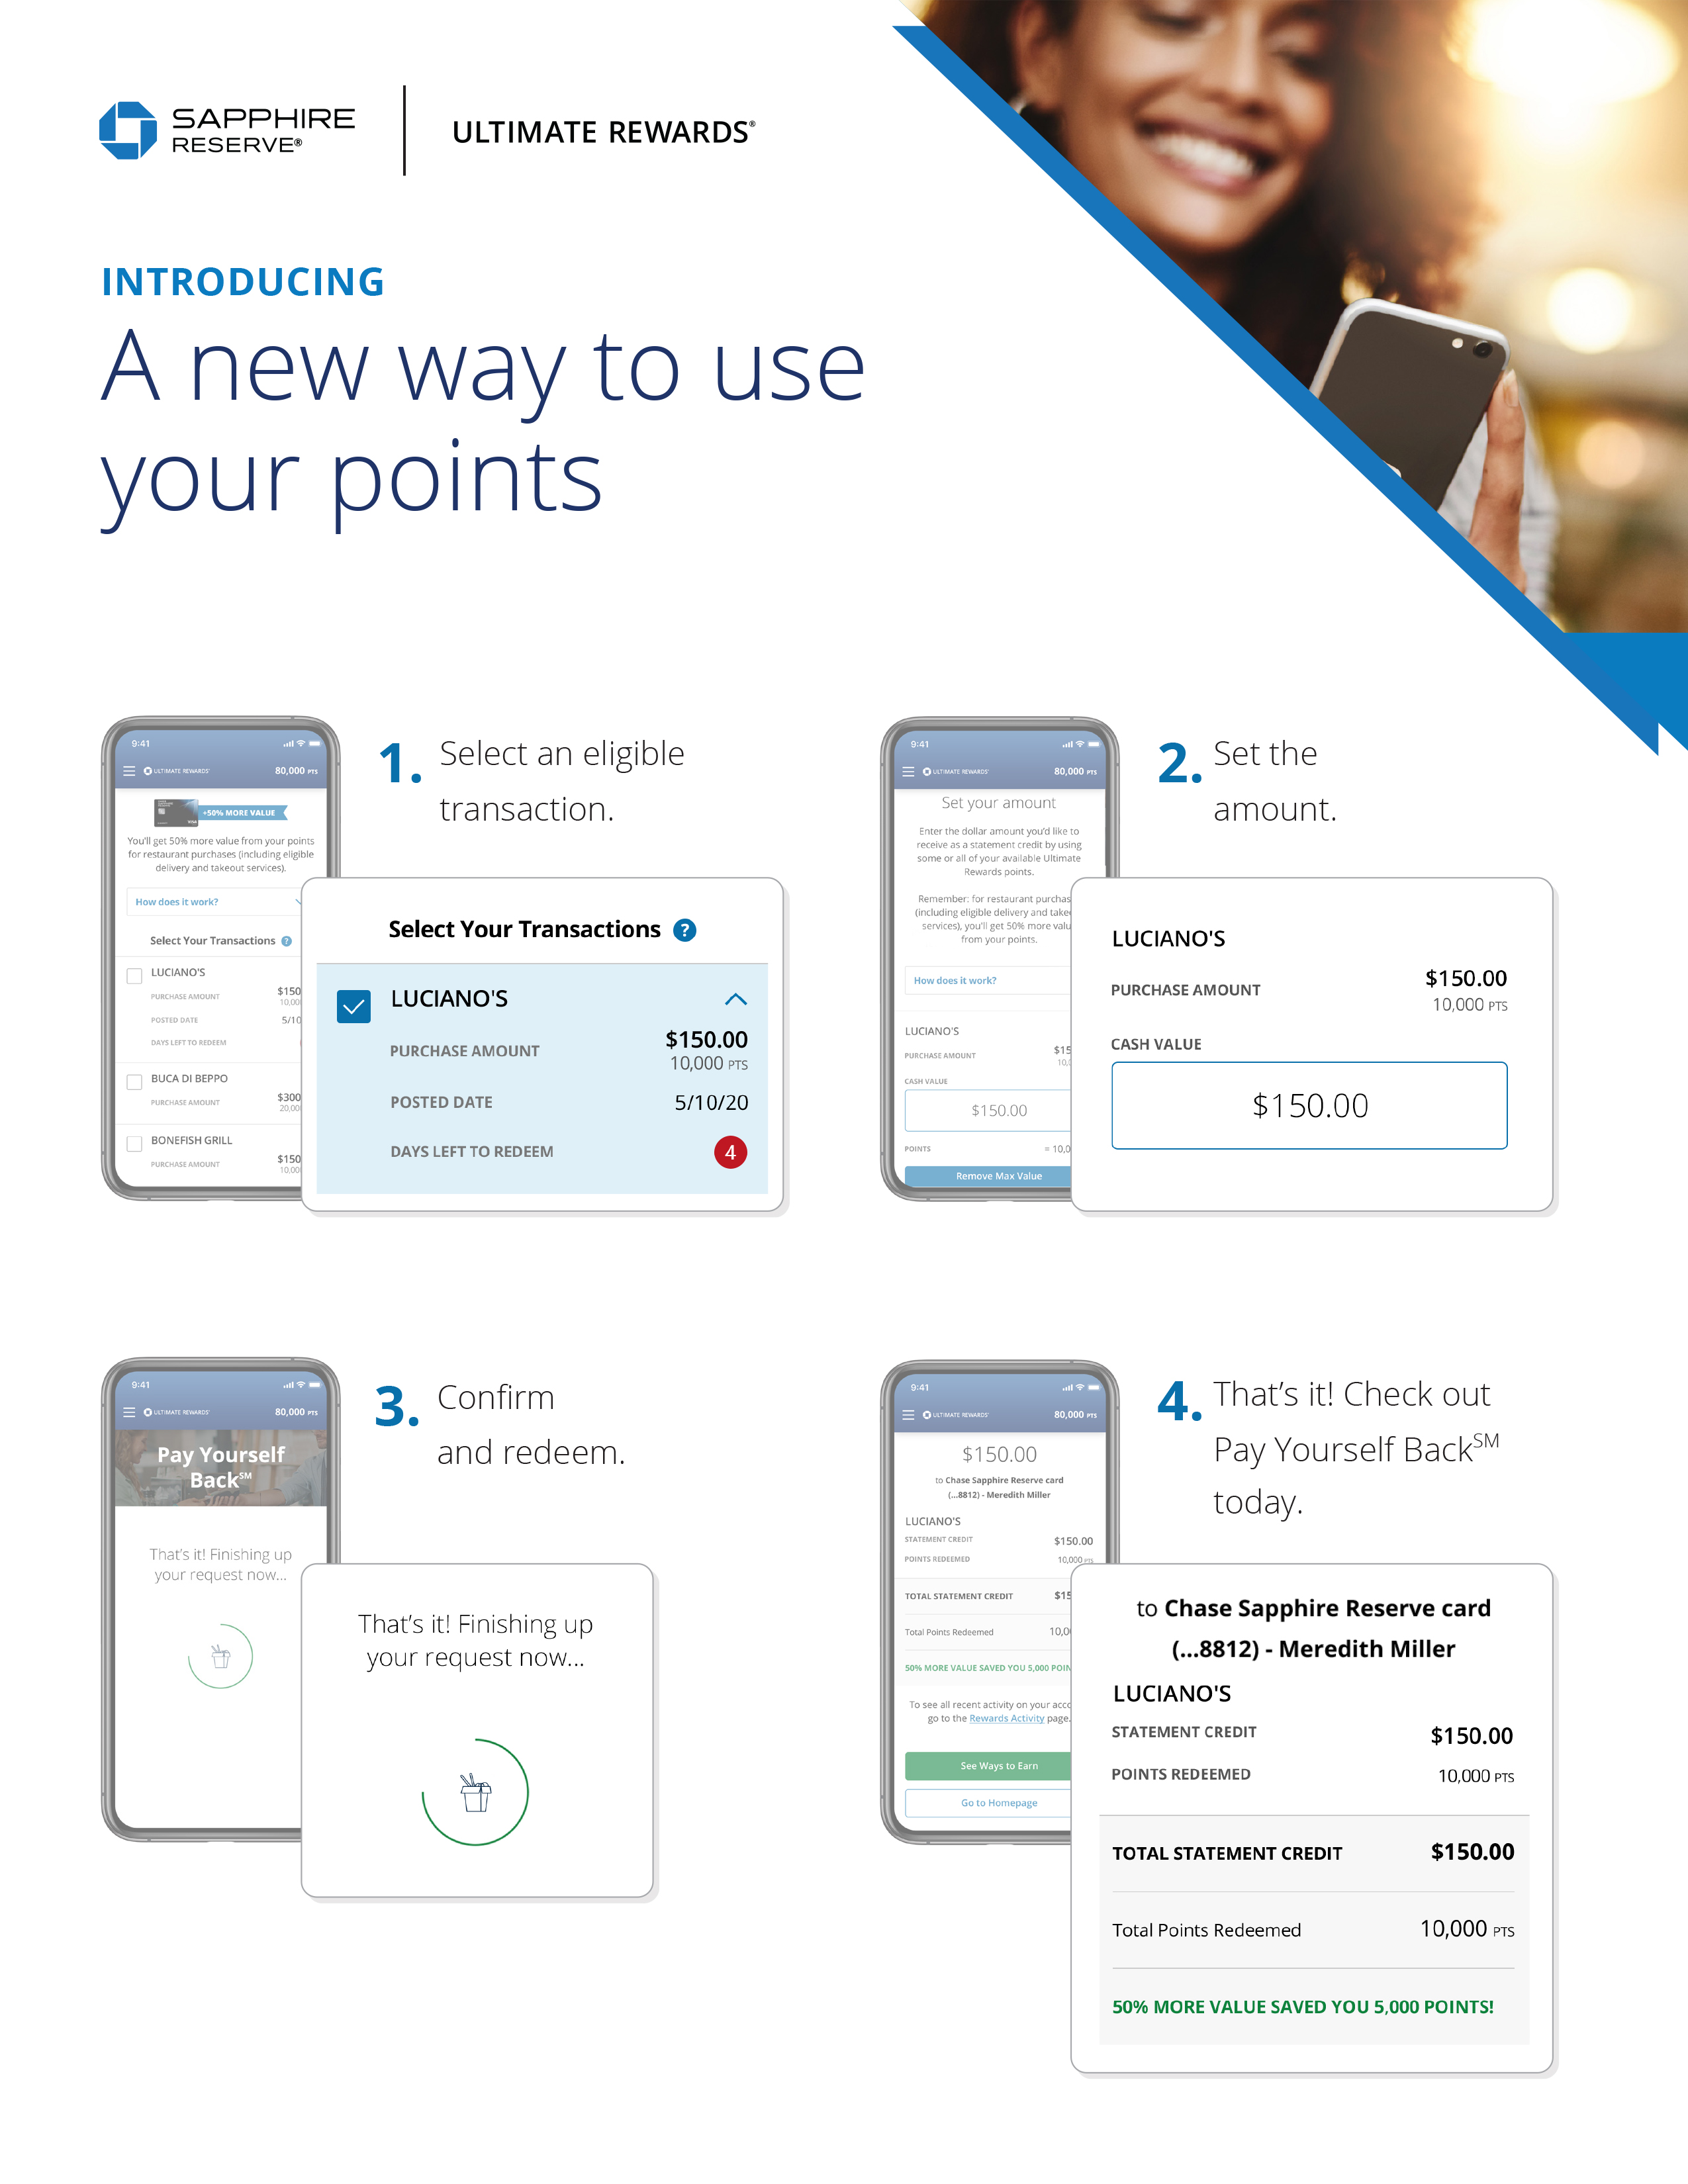 New Pay Yourself Back Feature Chase Gives Cardmembers New Options To Redeem Ultimate Rewards Points